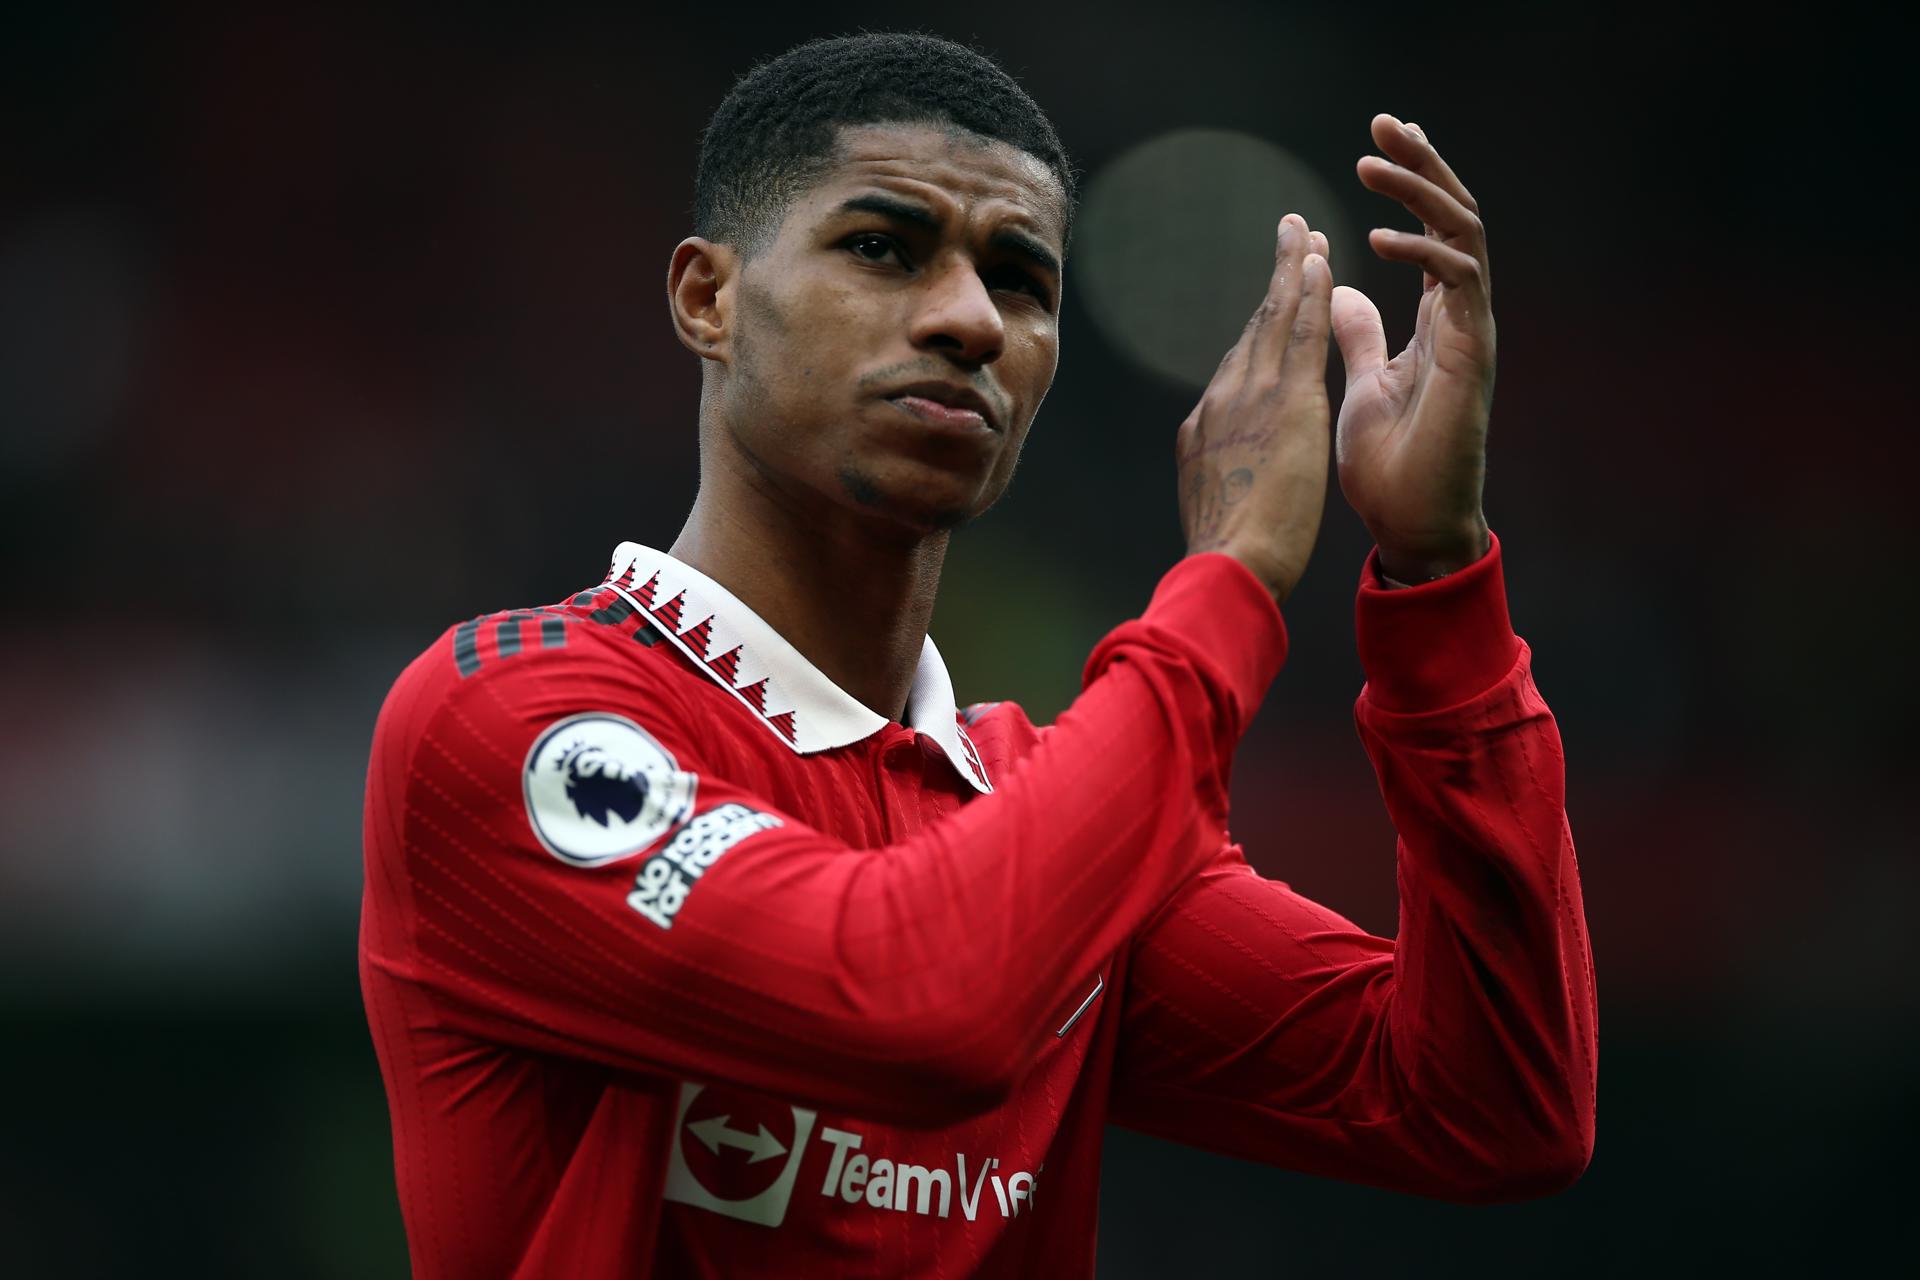 Manchester (United Kingdom), 12/03/2023.- Marcus Rashford of Manchester United reacts after the English Premier League soccer match between Manchester United and Southampton in Manchester, Britain, 12 March 2023. EFE/EPA/Adam Vaughan EDITORIAL USE ONLY. No use with unauthorized audio, video, data, fixture lists, club/league logos or 'live' services. Online in-match use limited to 120 images, no video emulation. No use in betting, games or single club/league/player publications